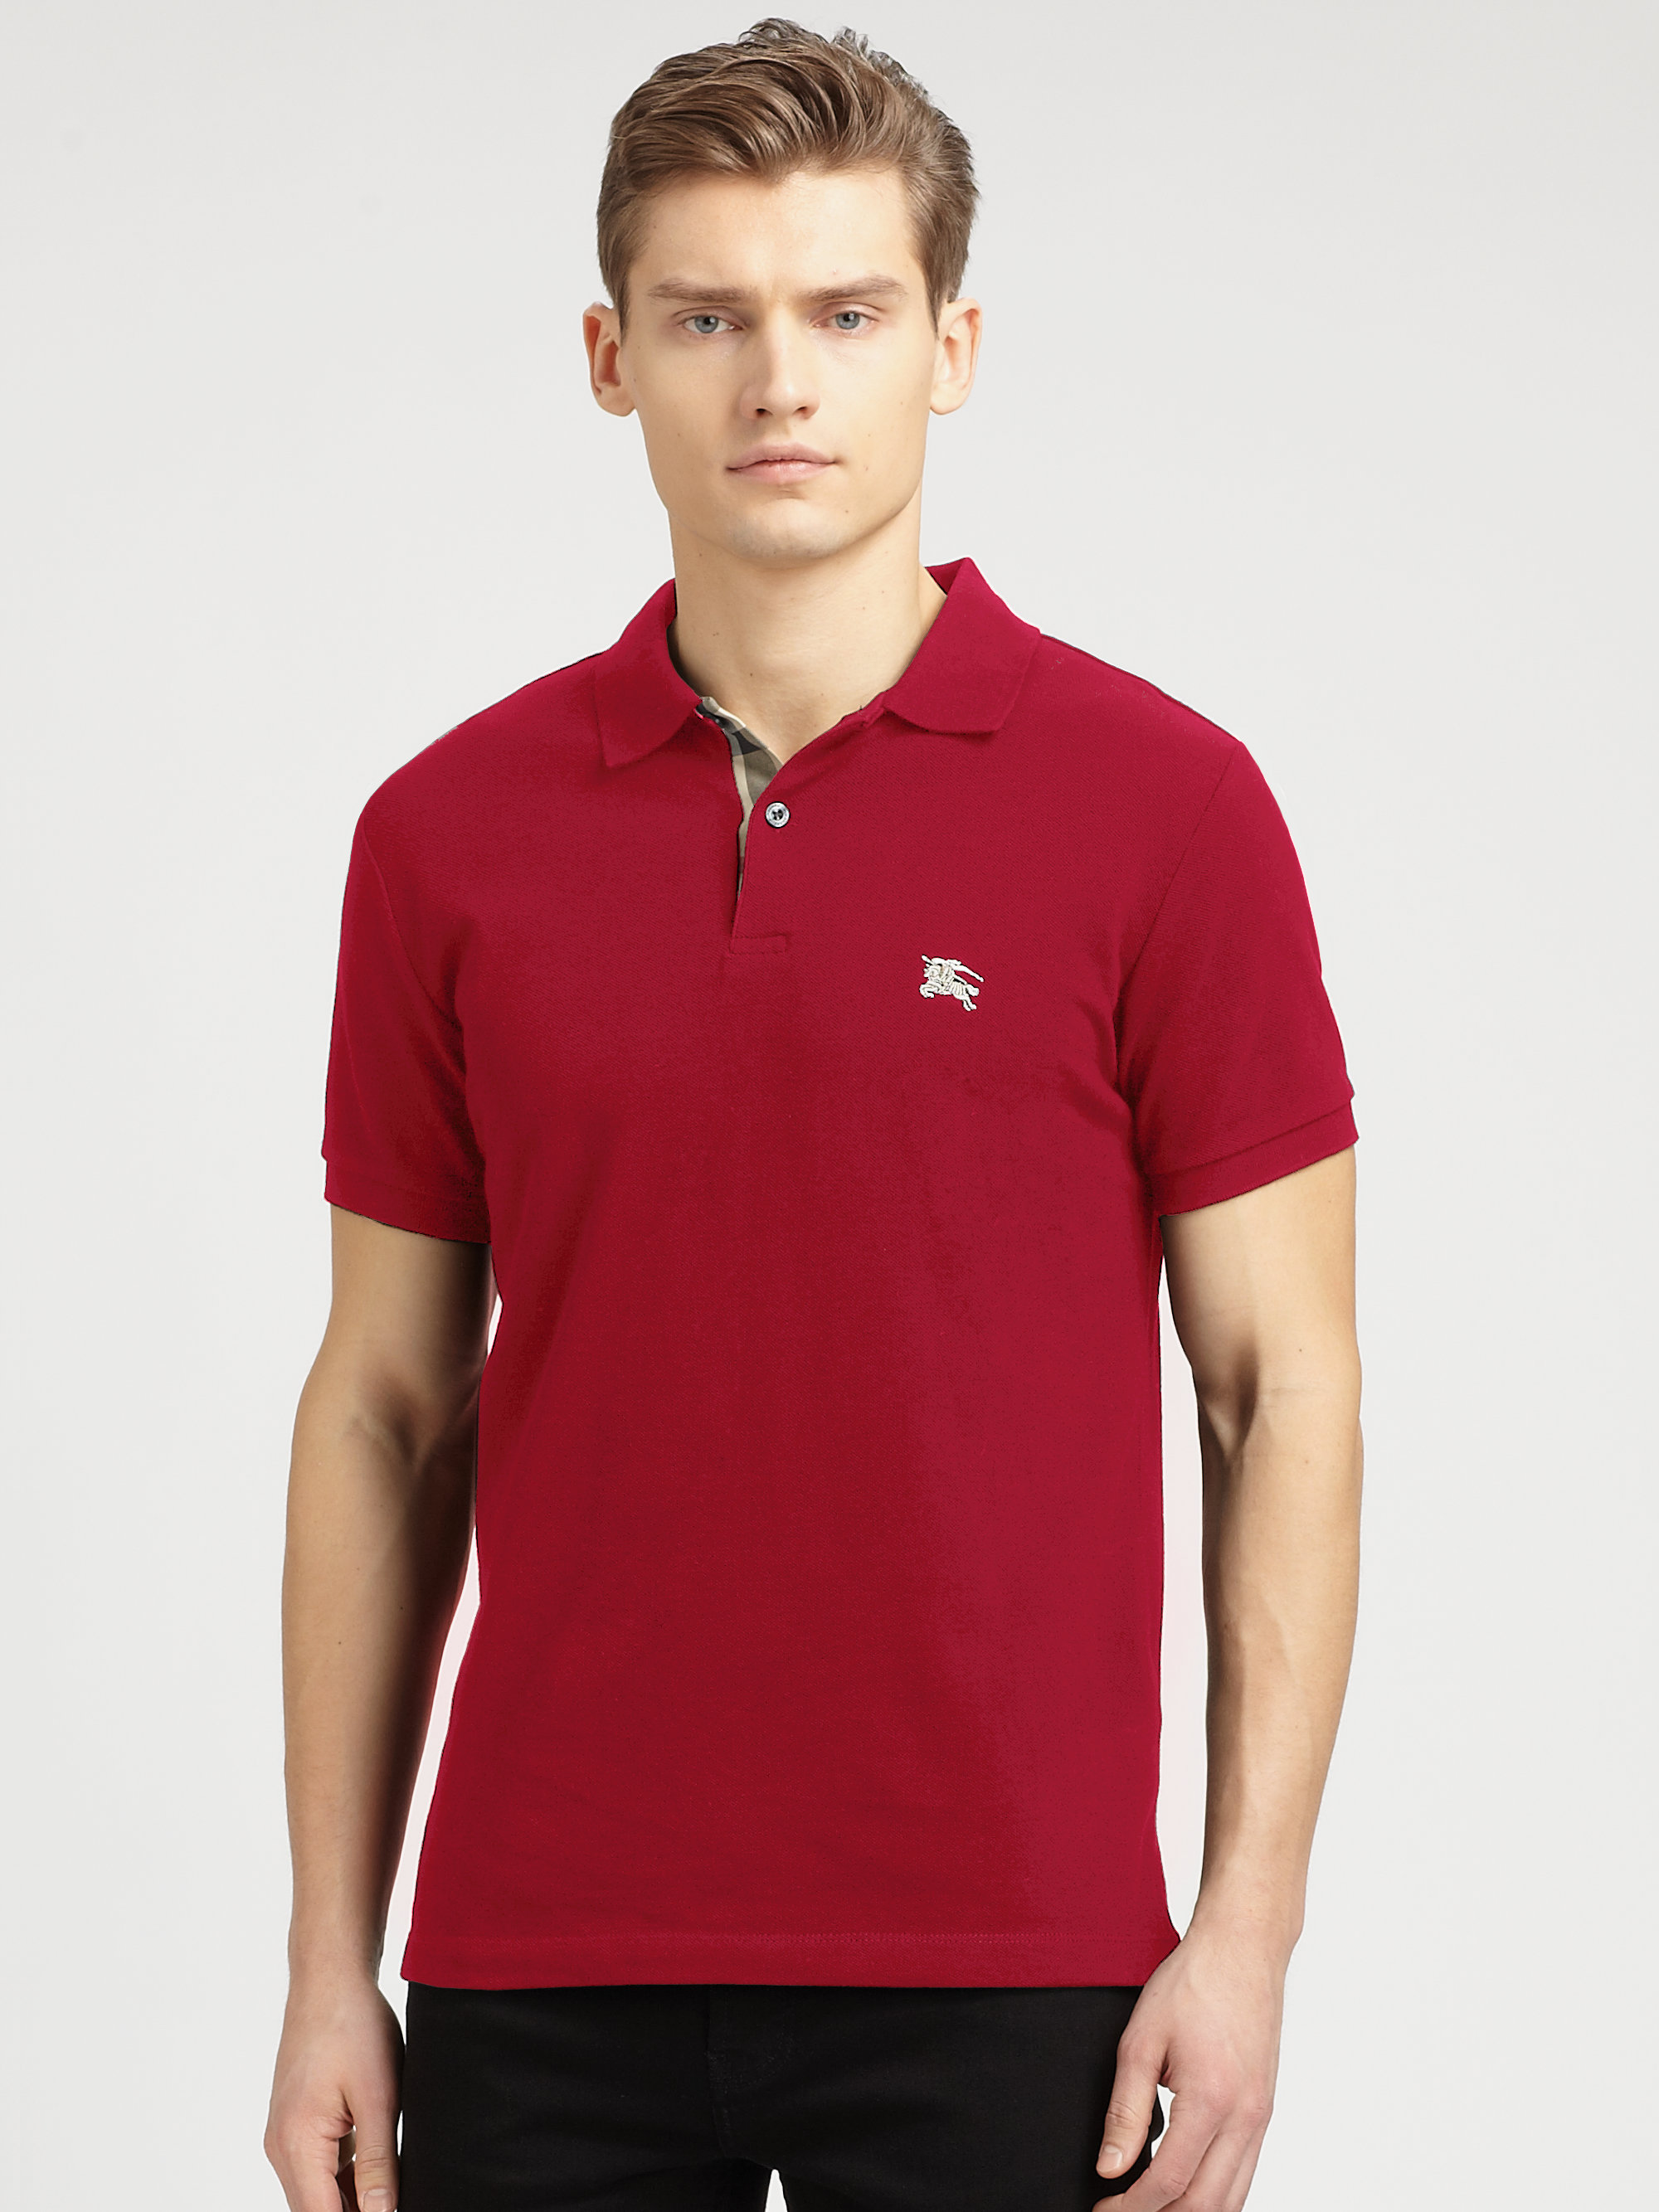 Burberry Red Polo Shirt Top Sellers, 52% OFF | www.smokymountains.org